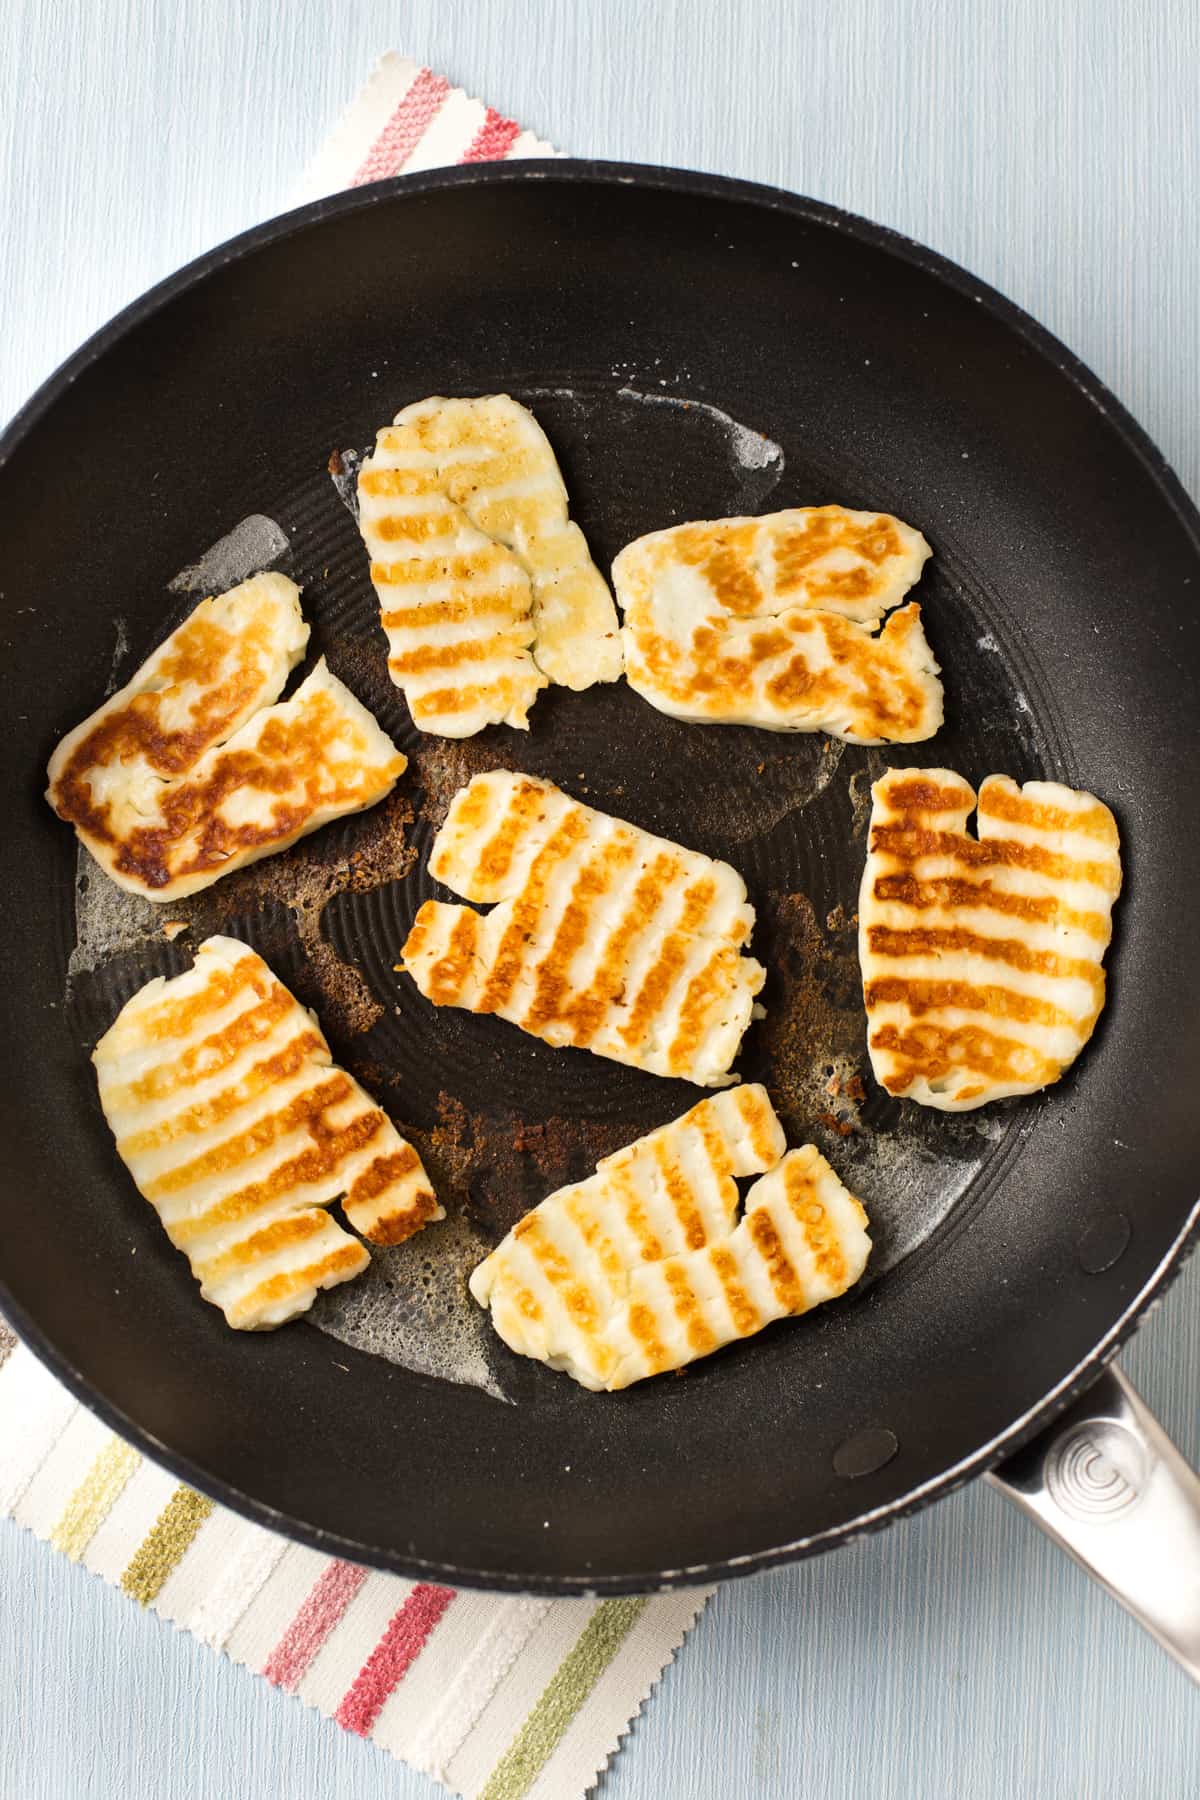 Slices of crispy halloumi cheese with golden brown griddle marks.